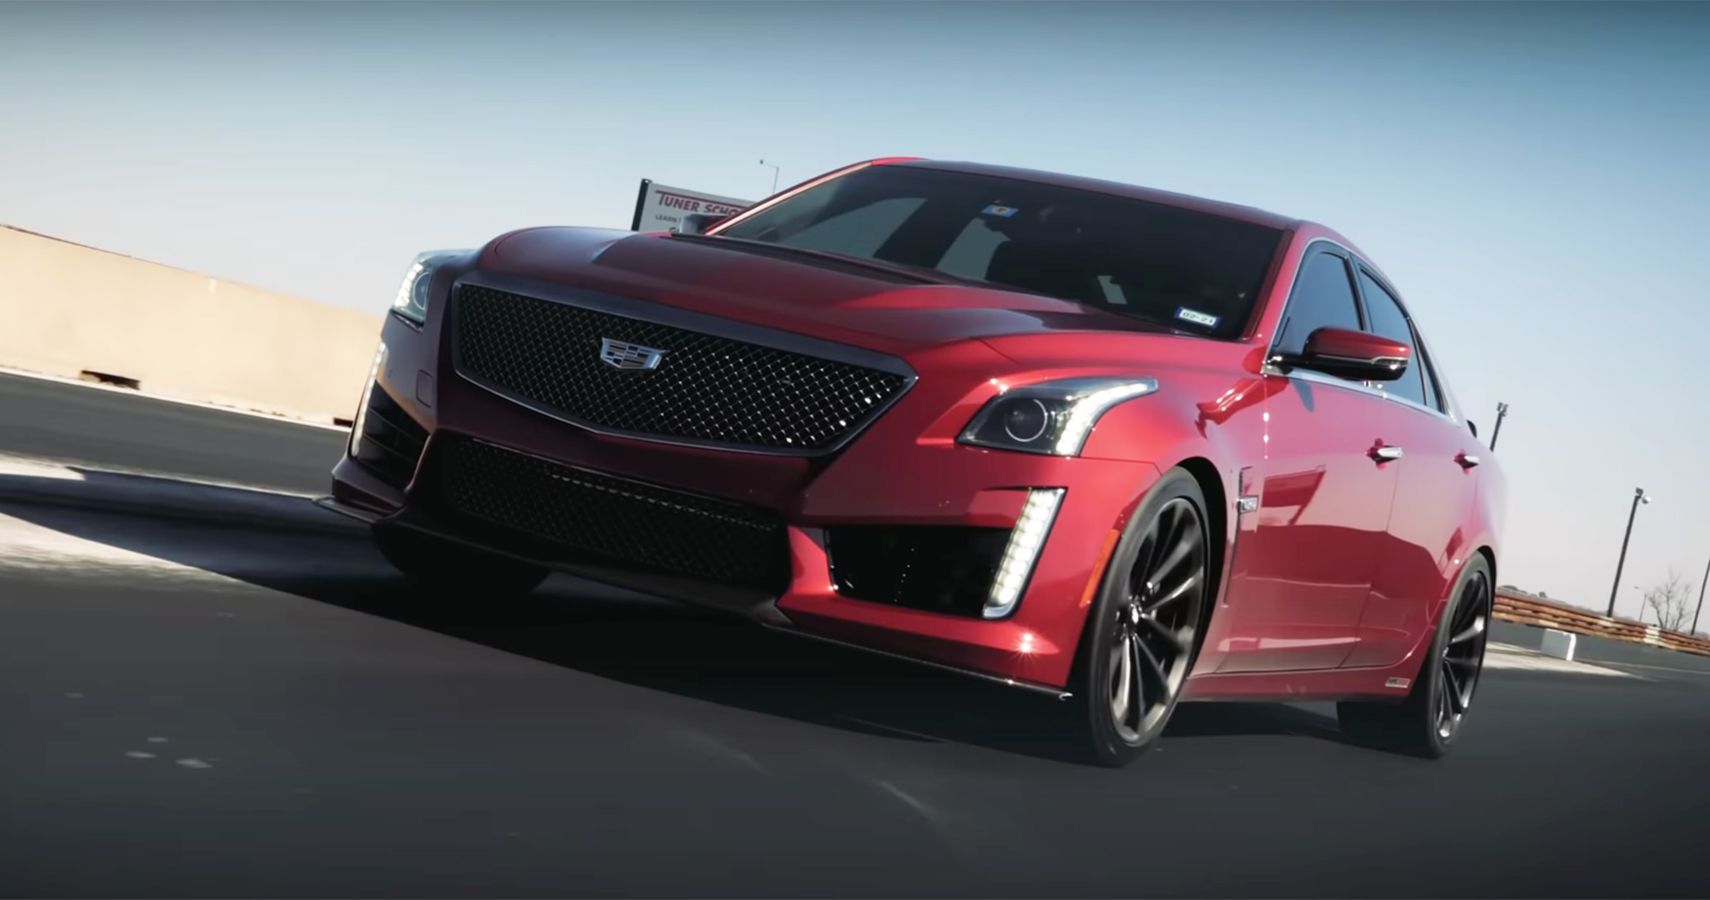 Hennessey's 1000-HP Cadillac CTS-V Is One Mean-Sounding Luxury Sedan